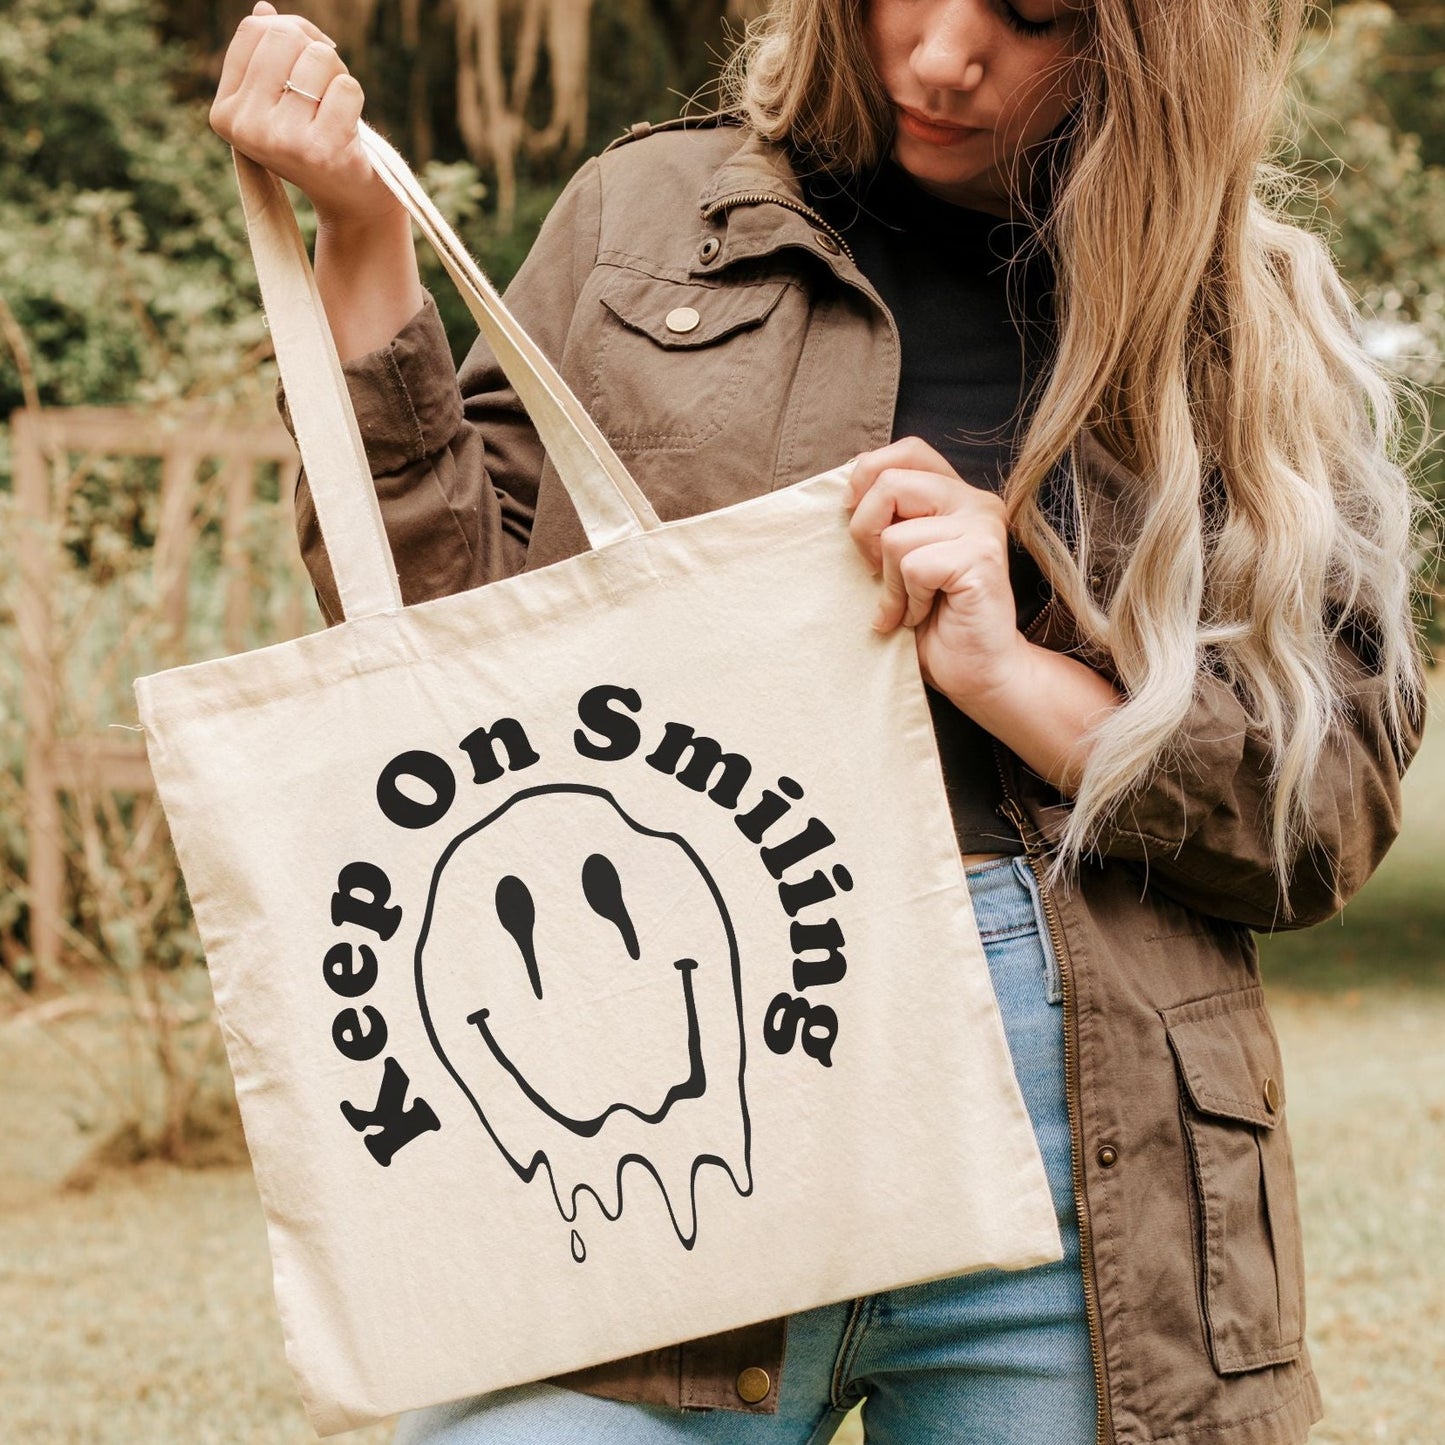 Melting Smiley Face Tote Bag, Keep on Smiling, Retro '90's Y2K Smiley Face Everyday Tote Bag, Trippy Dripping Happy Face Reusable shopping